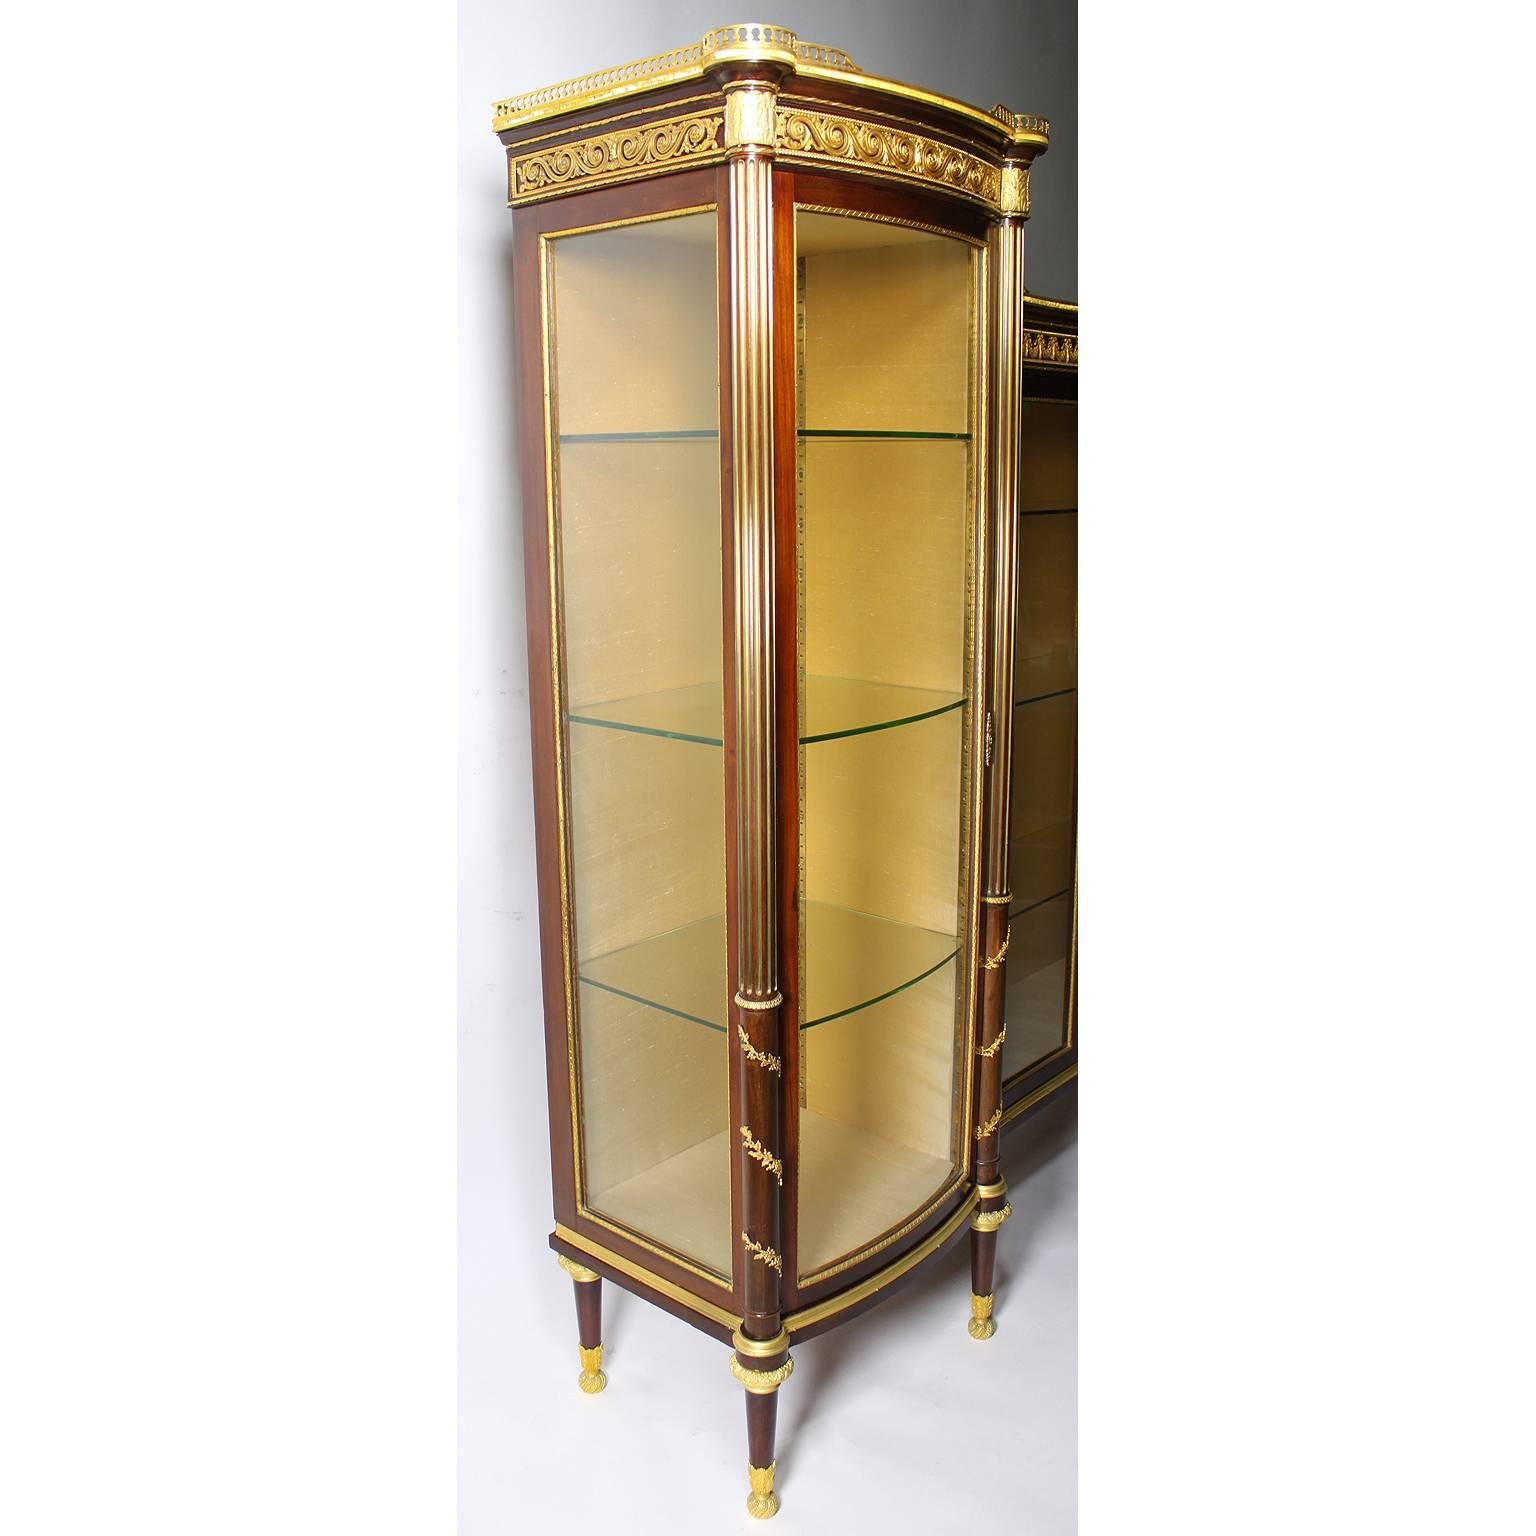 Early 20th Century French 19th-20th Century Louis XVI Style Mahogany and Ormolu-Mounted Vitrine For Sale